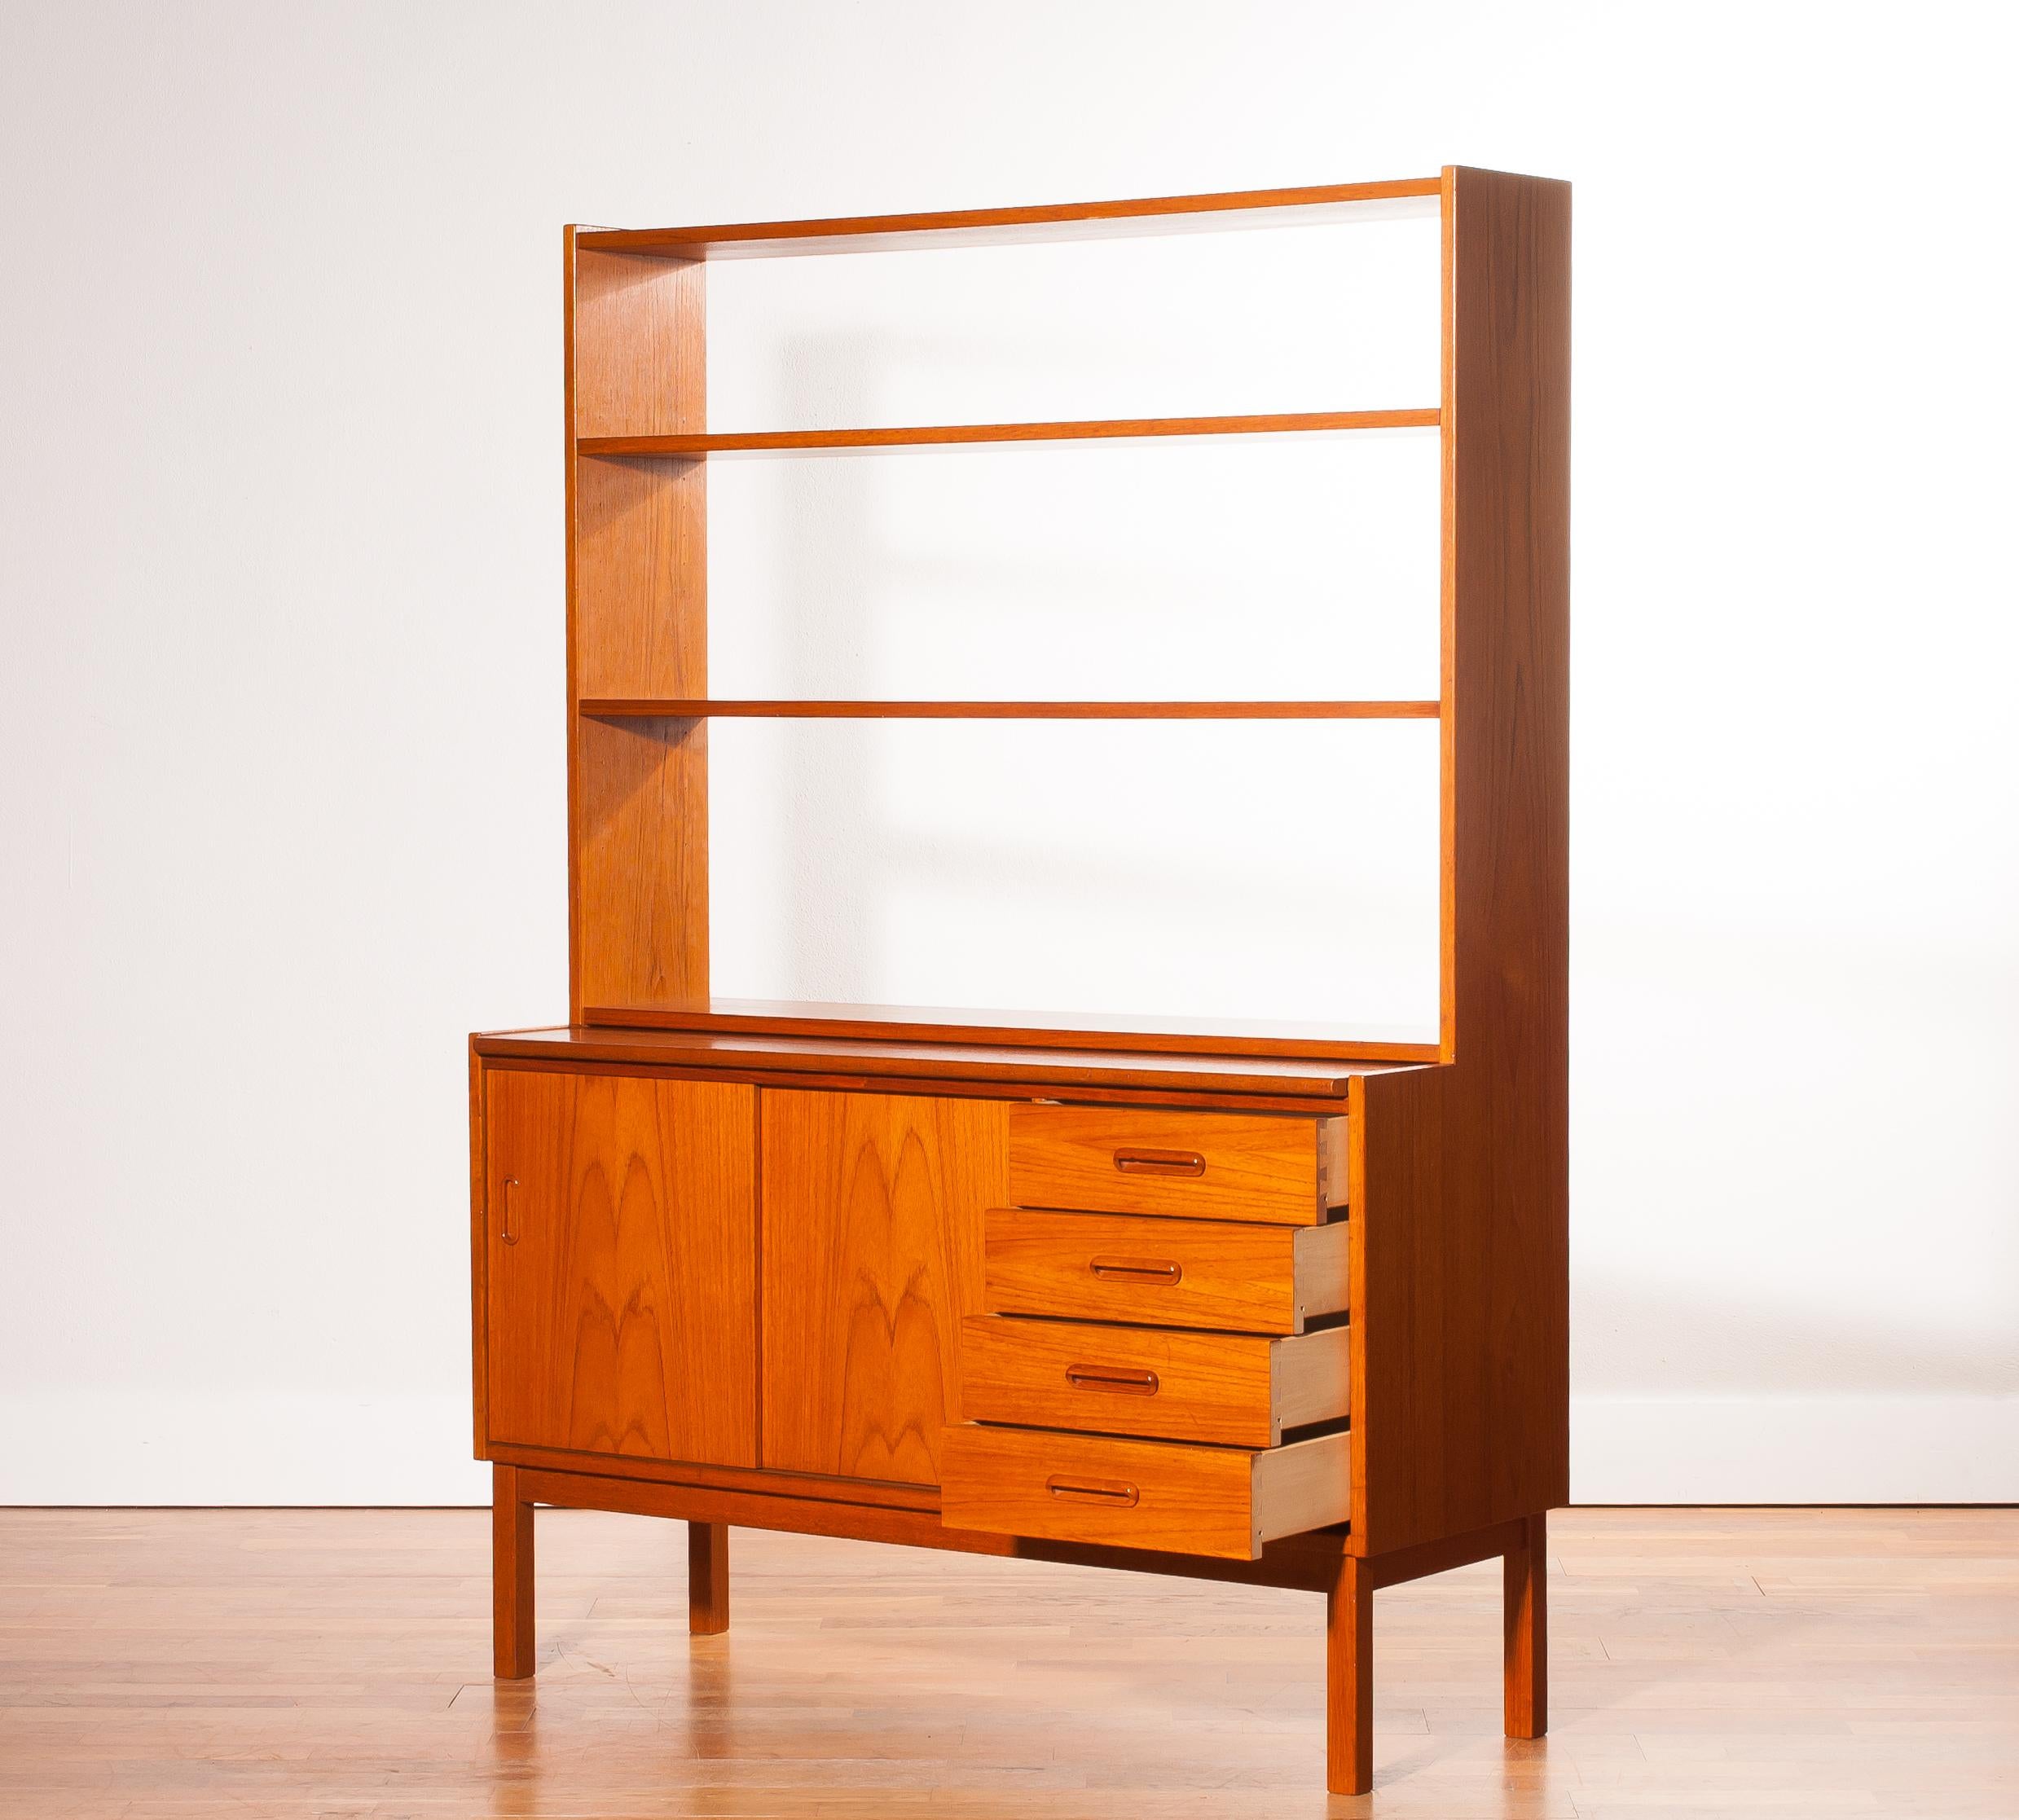 Swedish Teak Book Case with Slidable Writing or Working Space from Sweden, 1960s